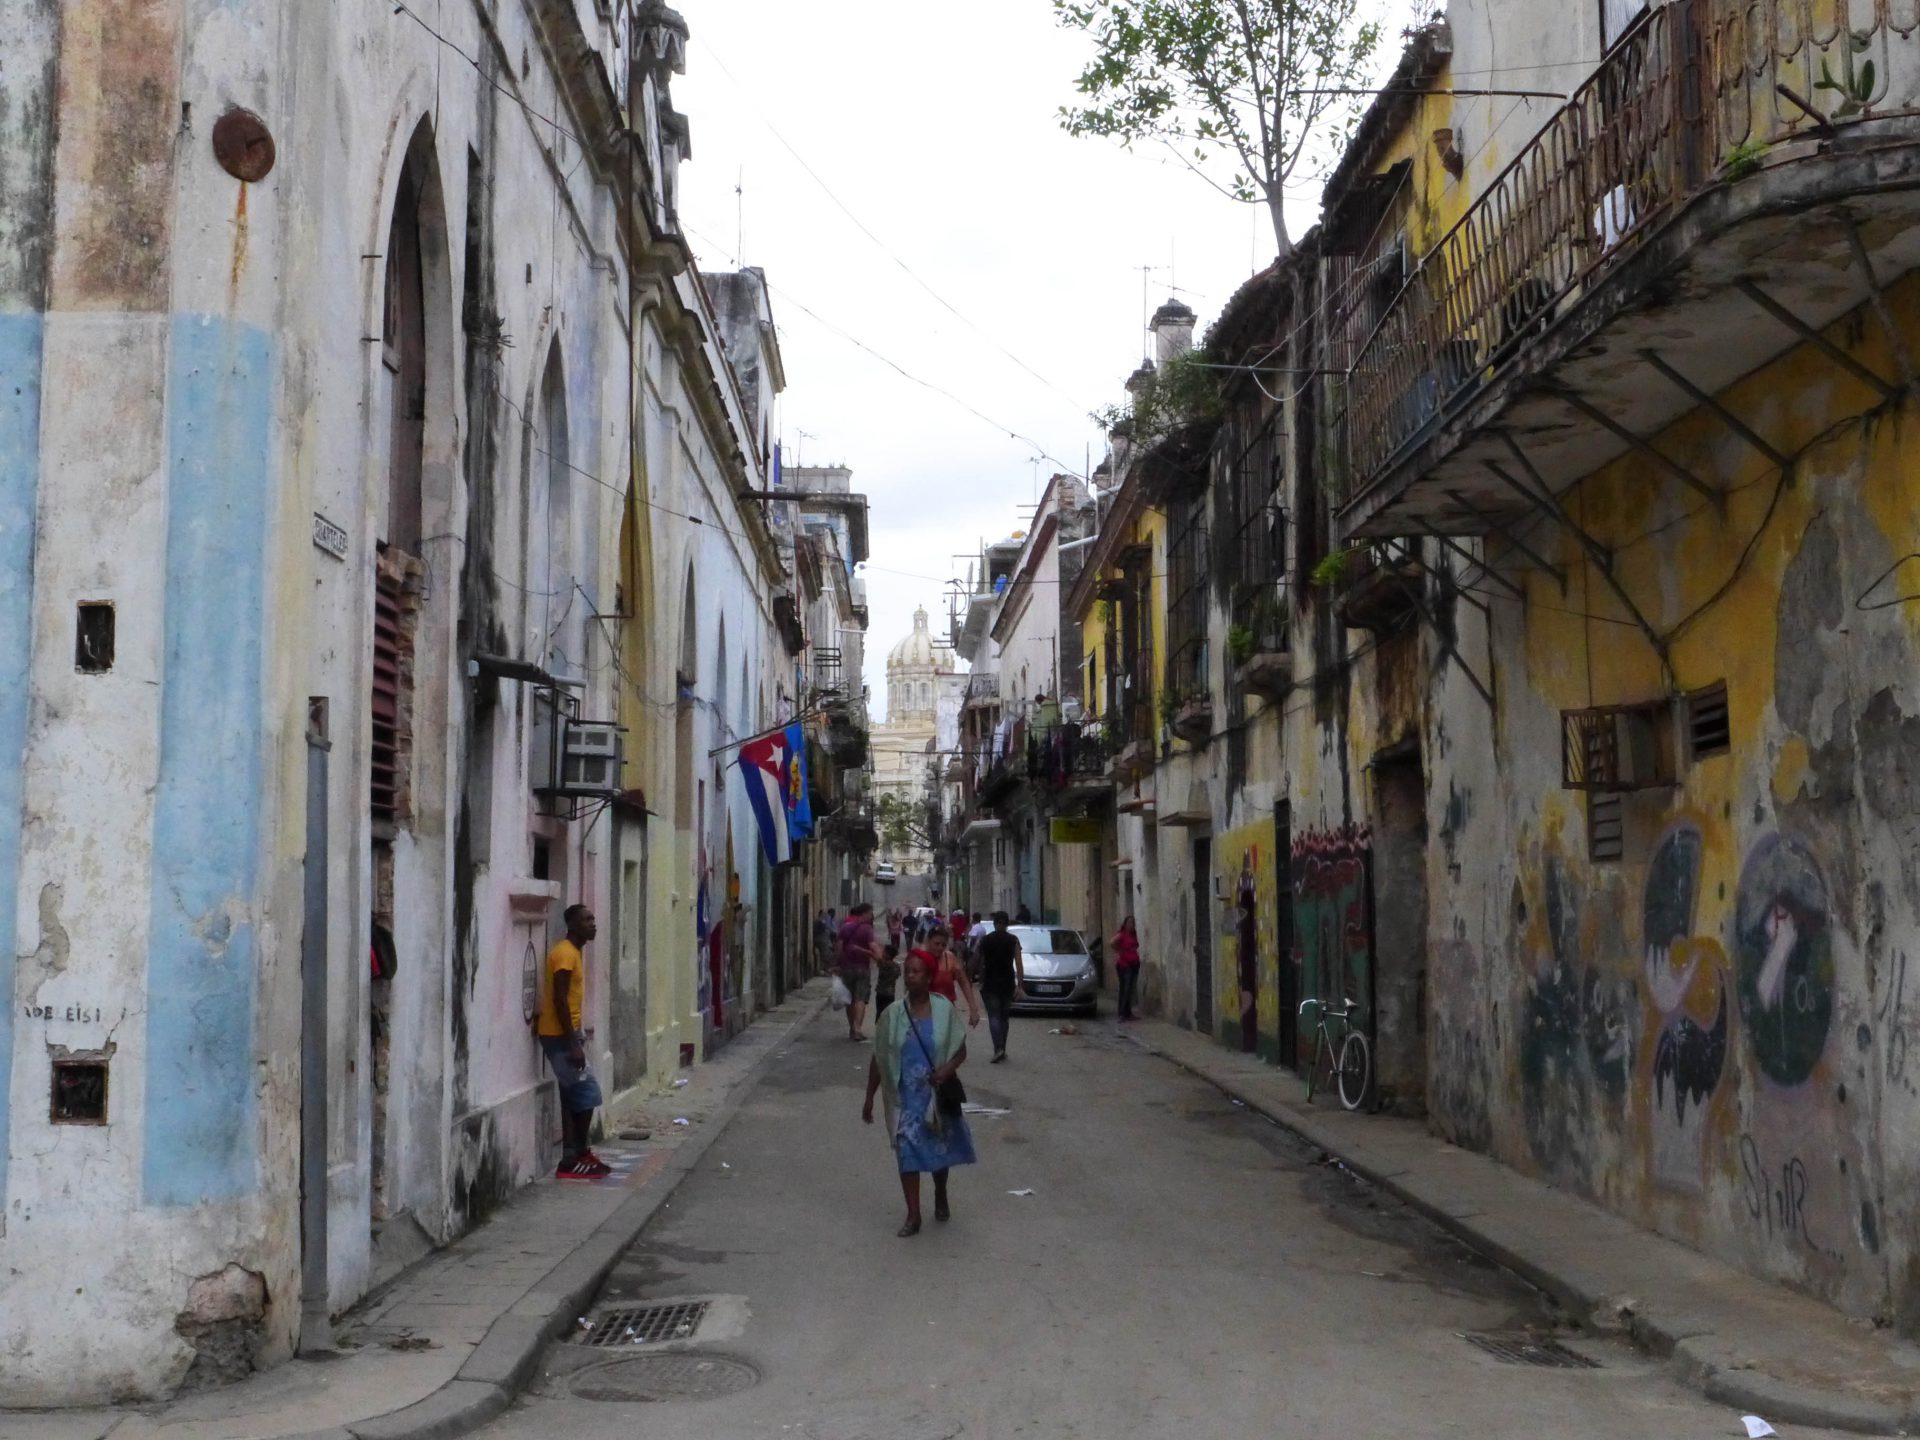 Commoning institutions – a view from Cuba